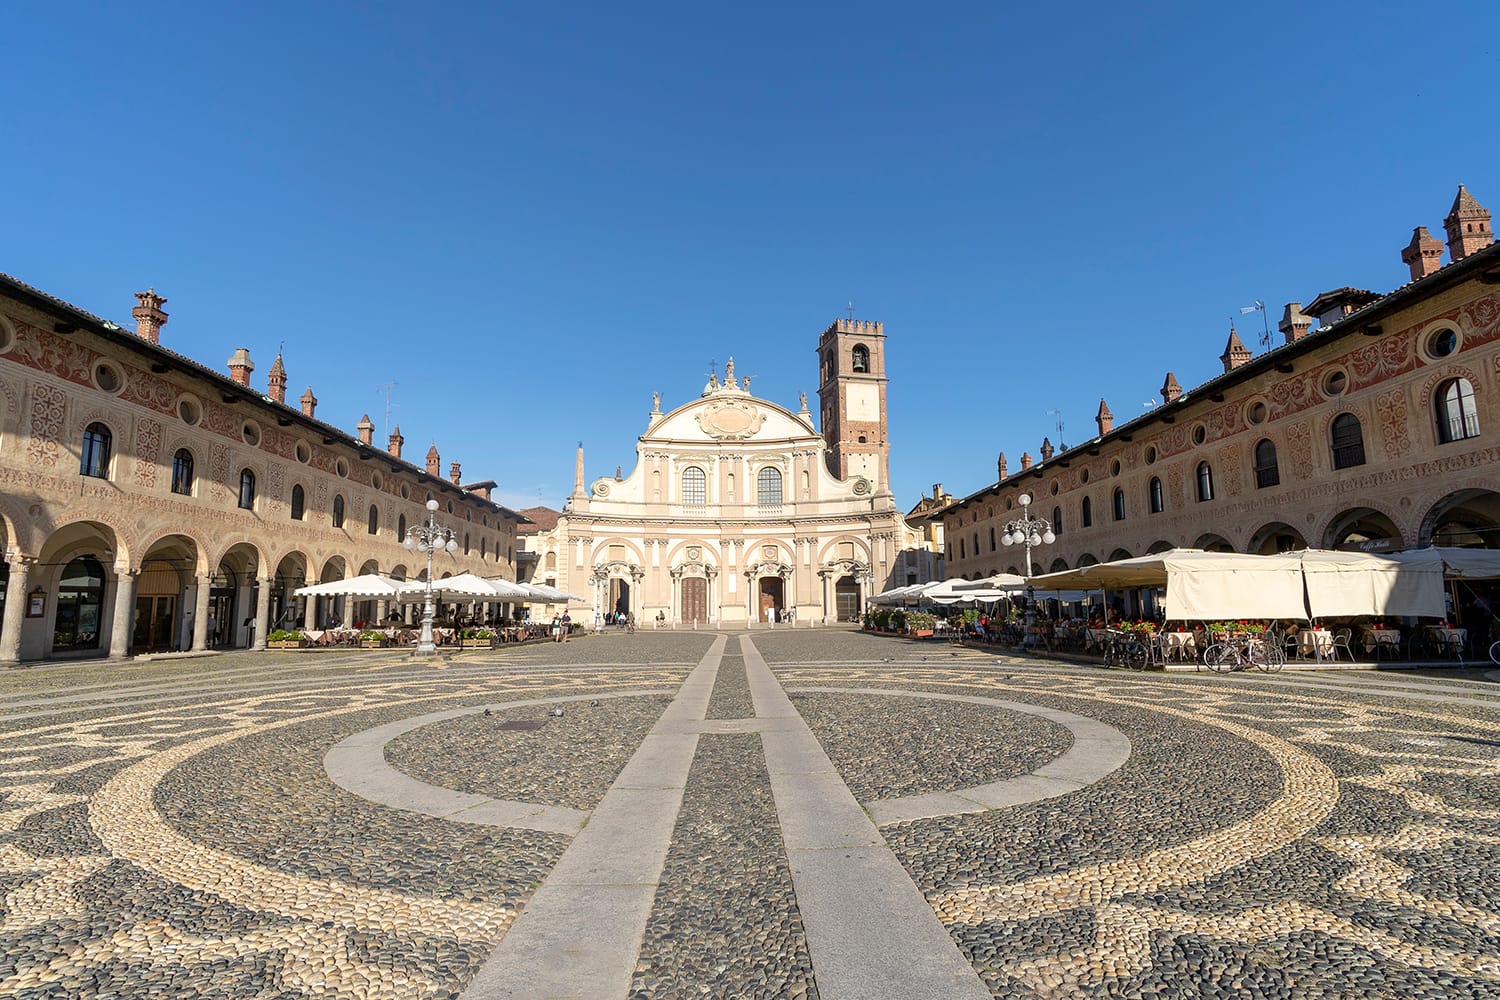 Vigevano, Pavia, Lombardy, Italy: the historic main square of the city, known as Piazza Ducale